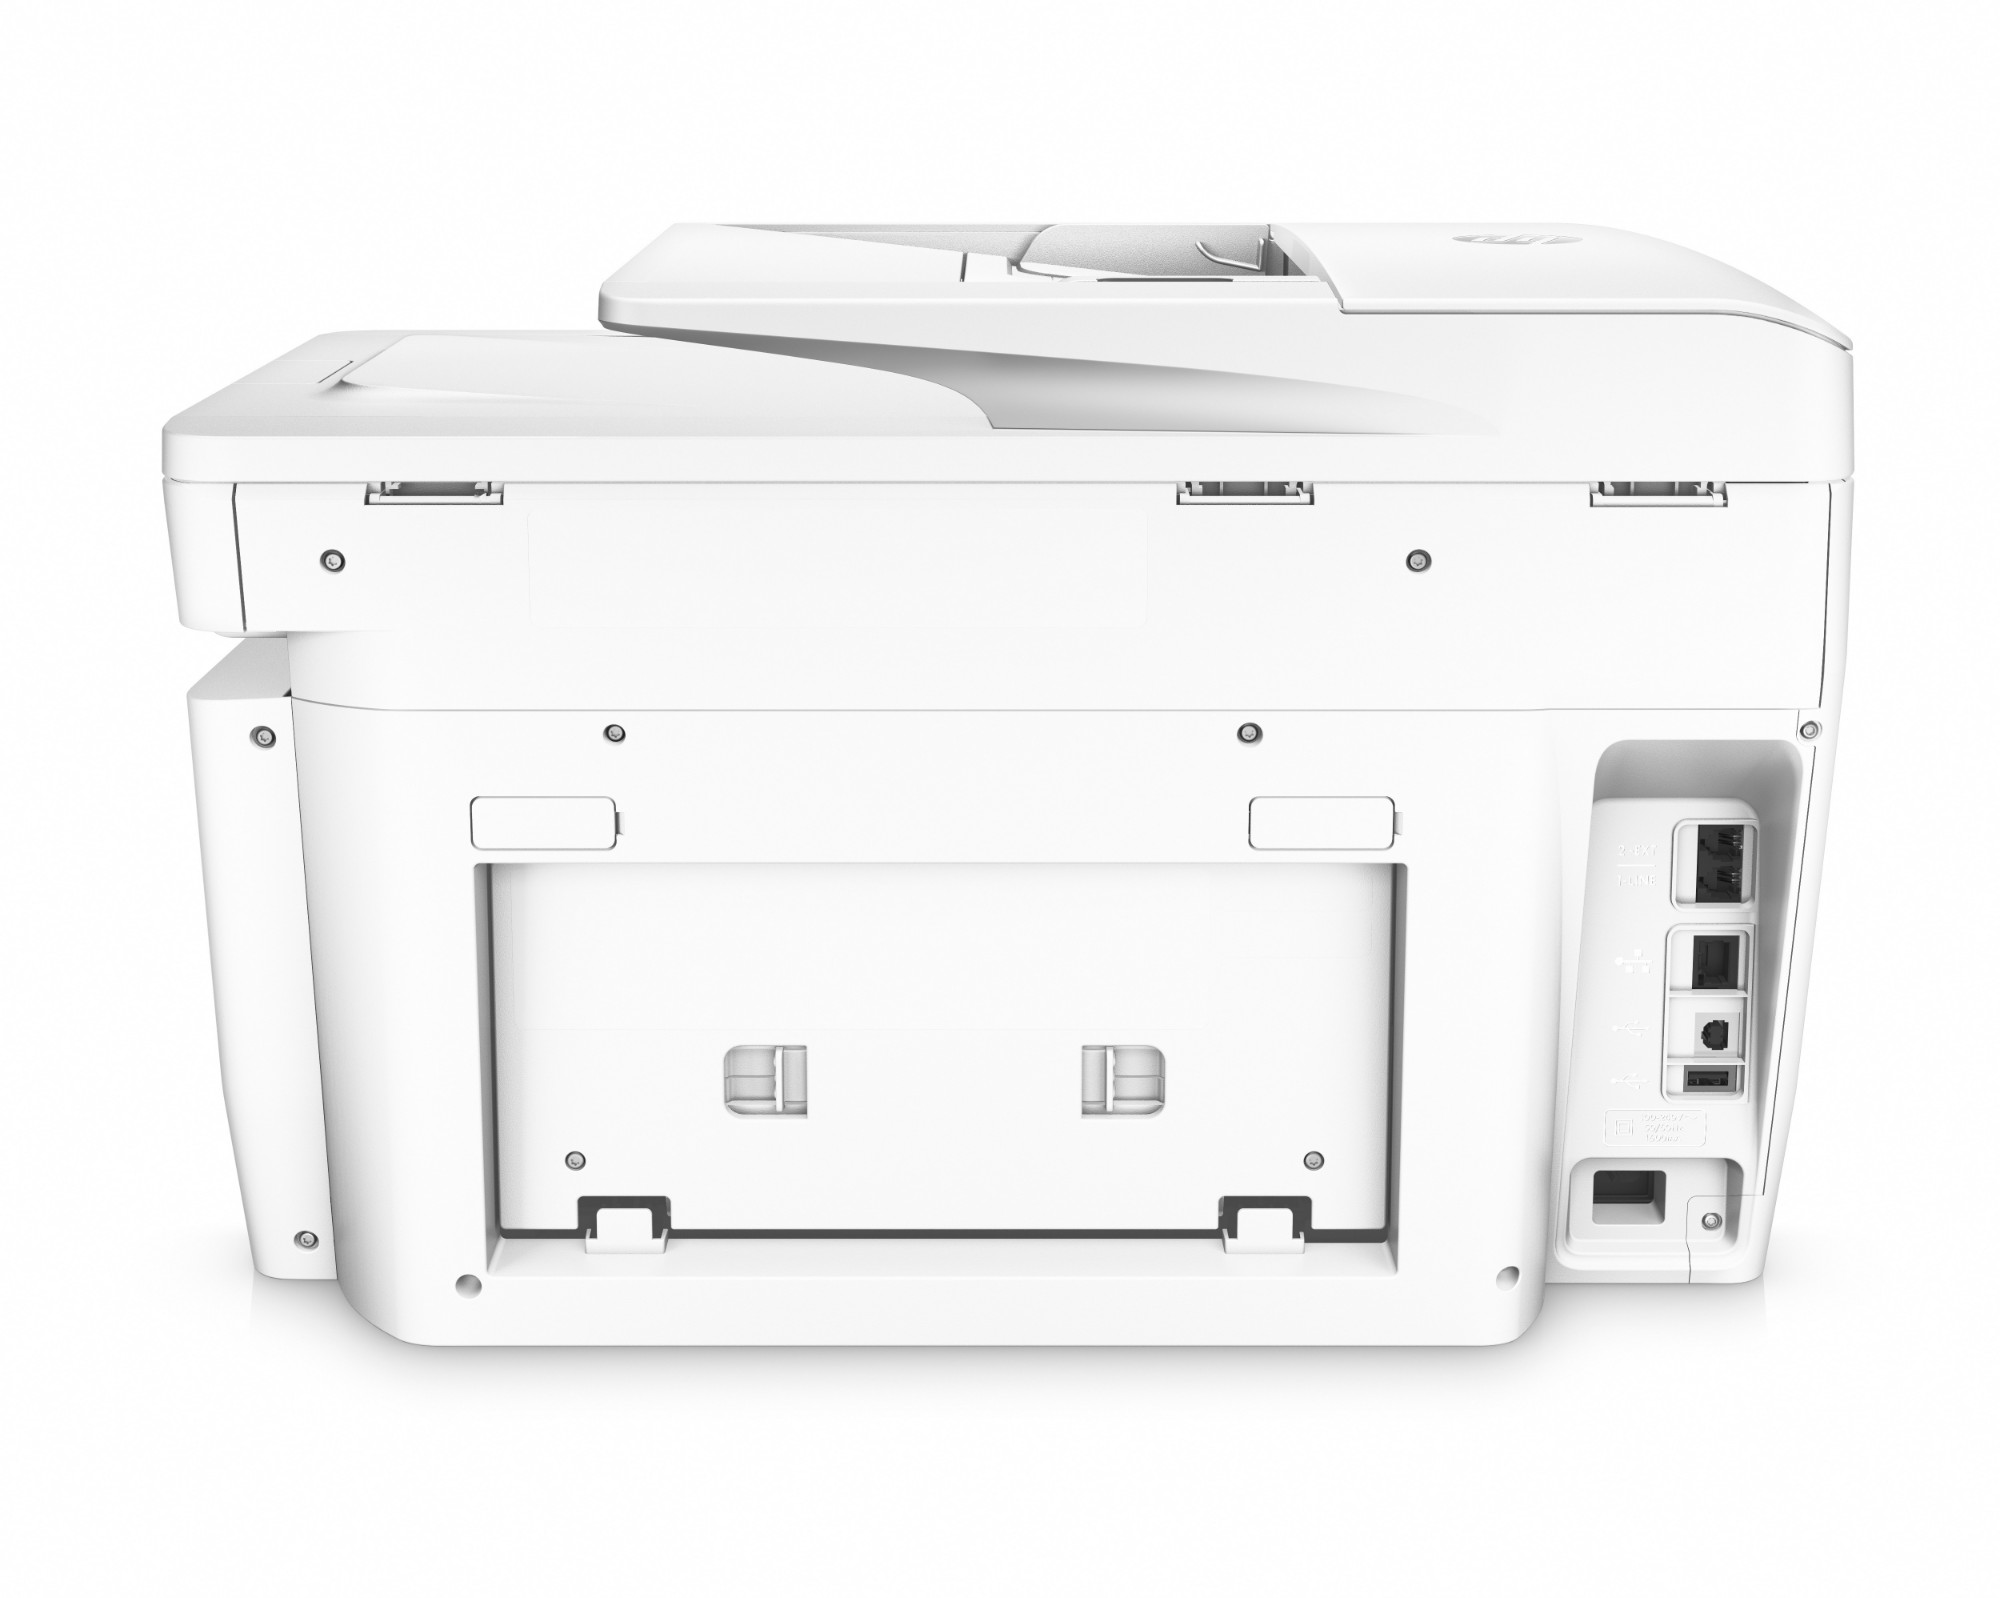 HP OfficeJet Pro 8730 All-in-One Printer, Color, Printer for Home, Print, copy, scan, fax, 50-sheet ADF; Front-facing USB printing; Scan to email/PDF; Two-sided printing